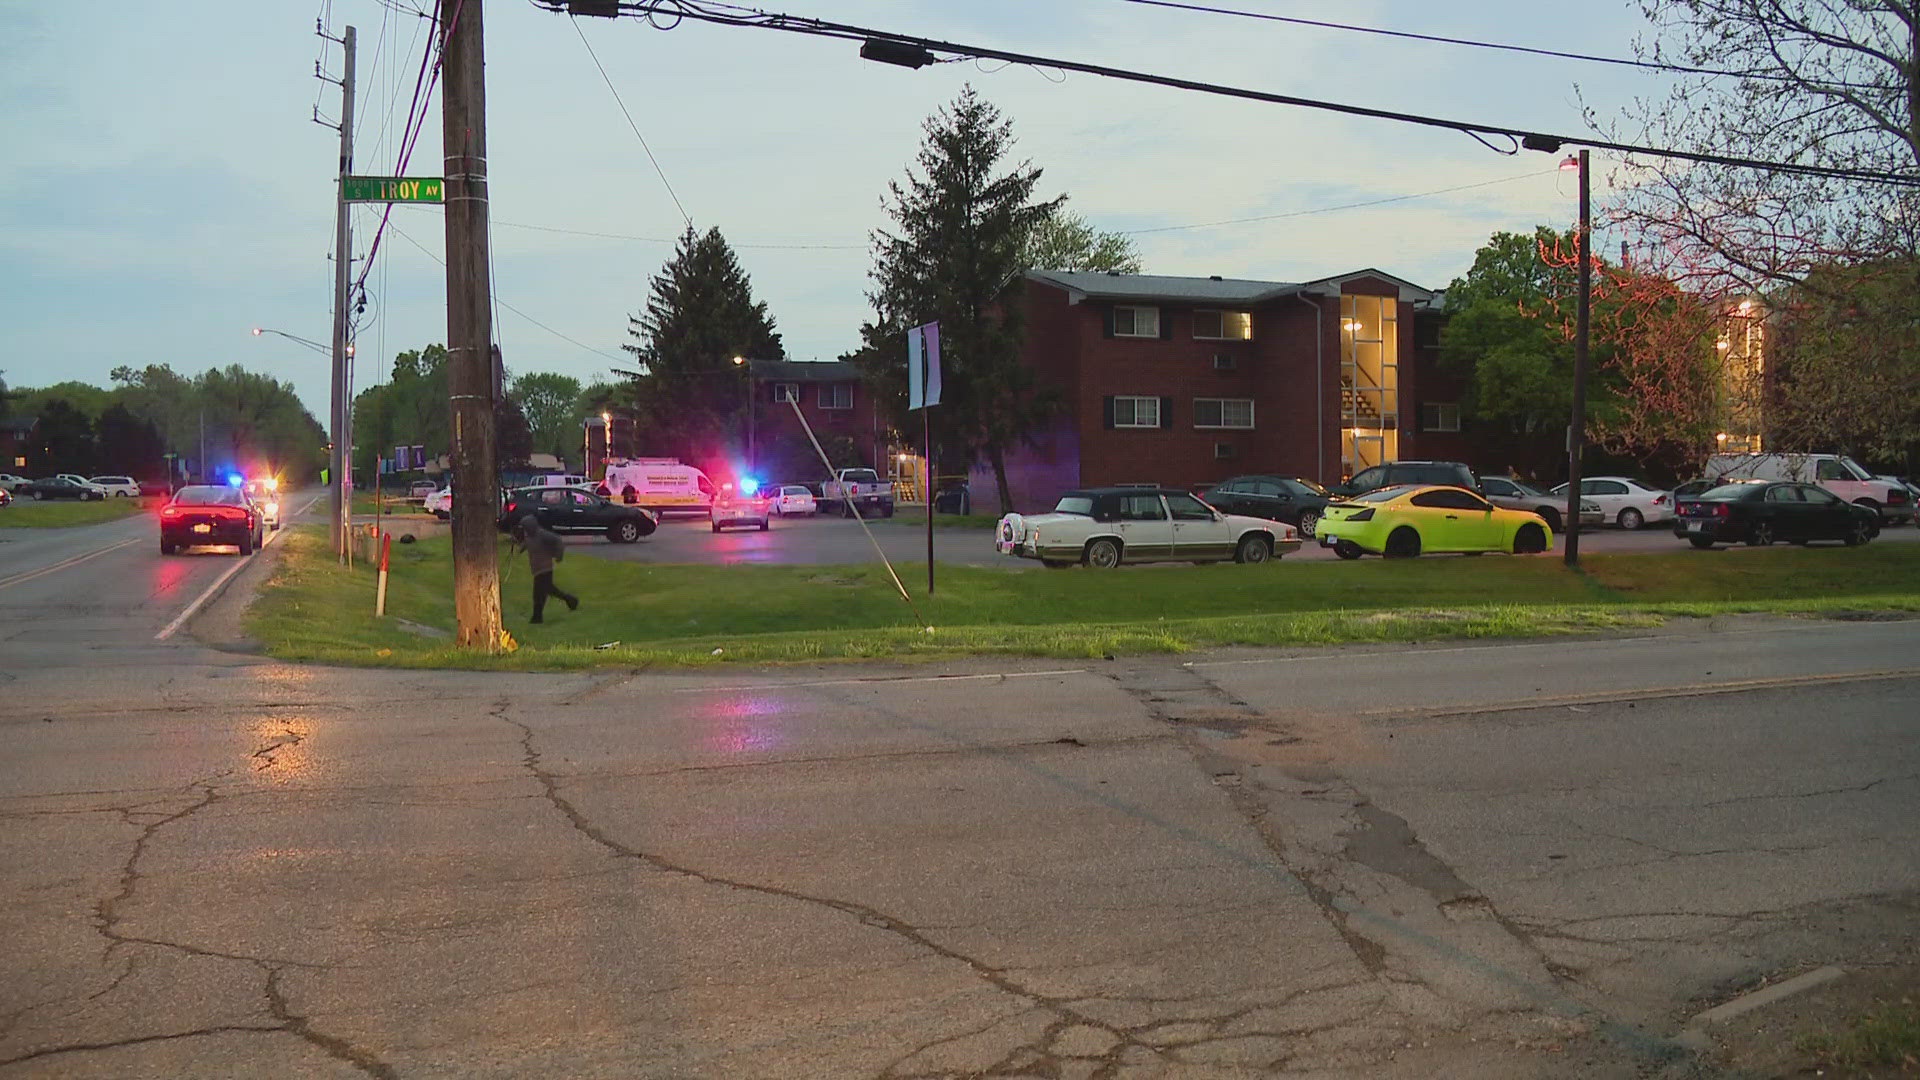 The incident happened around 8 p.m. Friday near South Meridian Street and Troy Avenue.